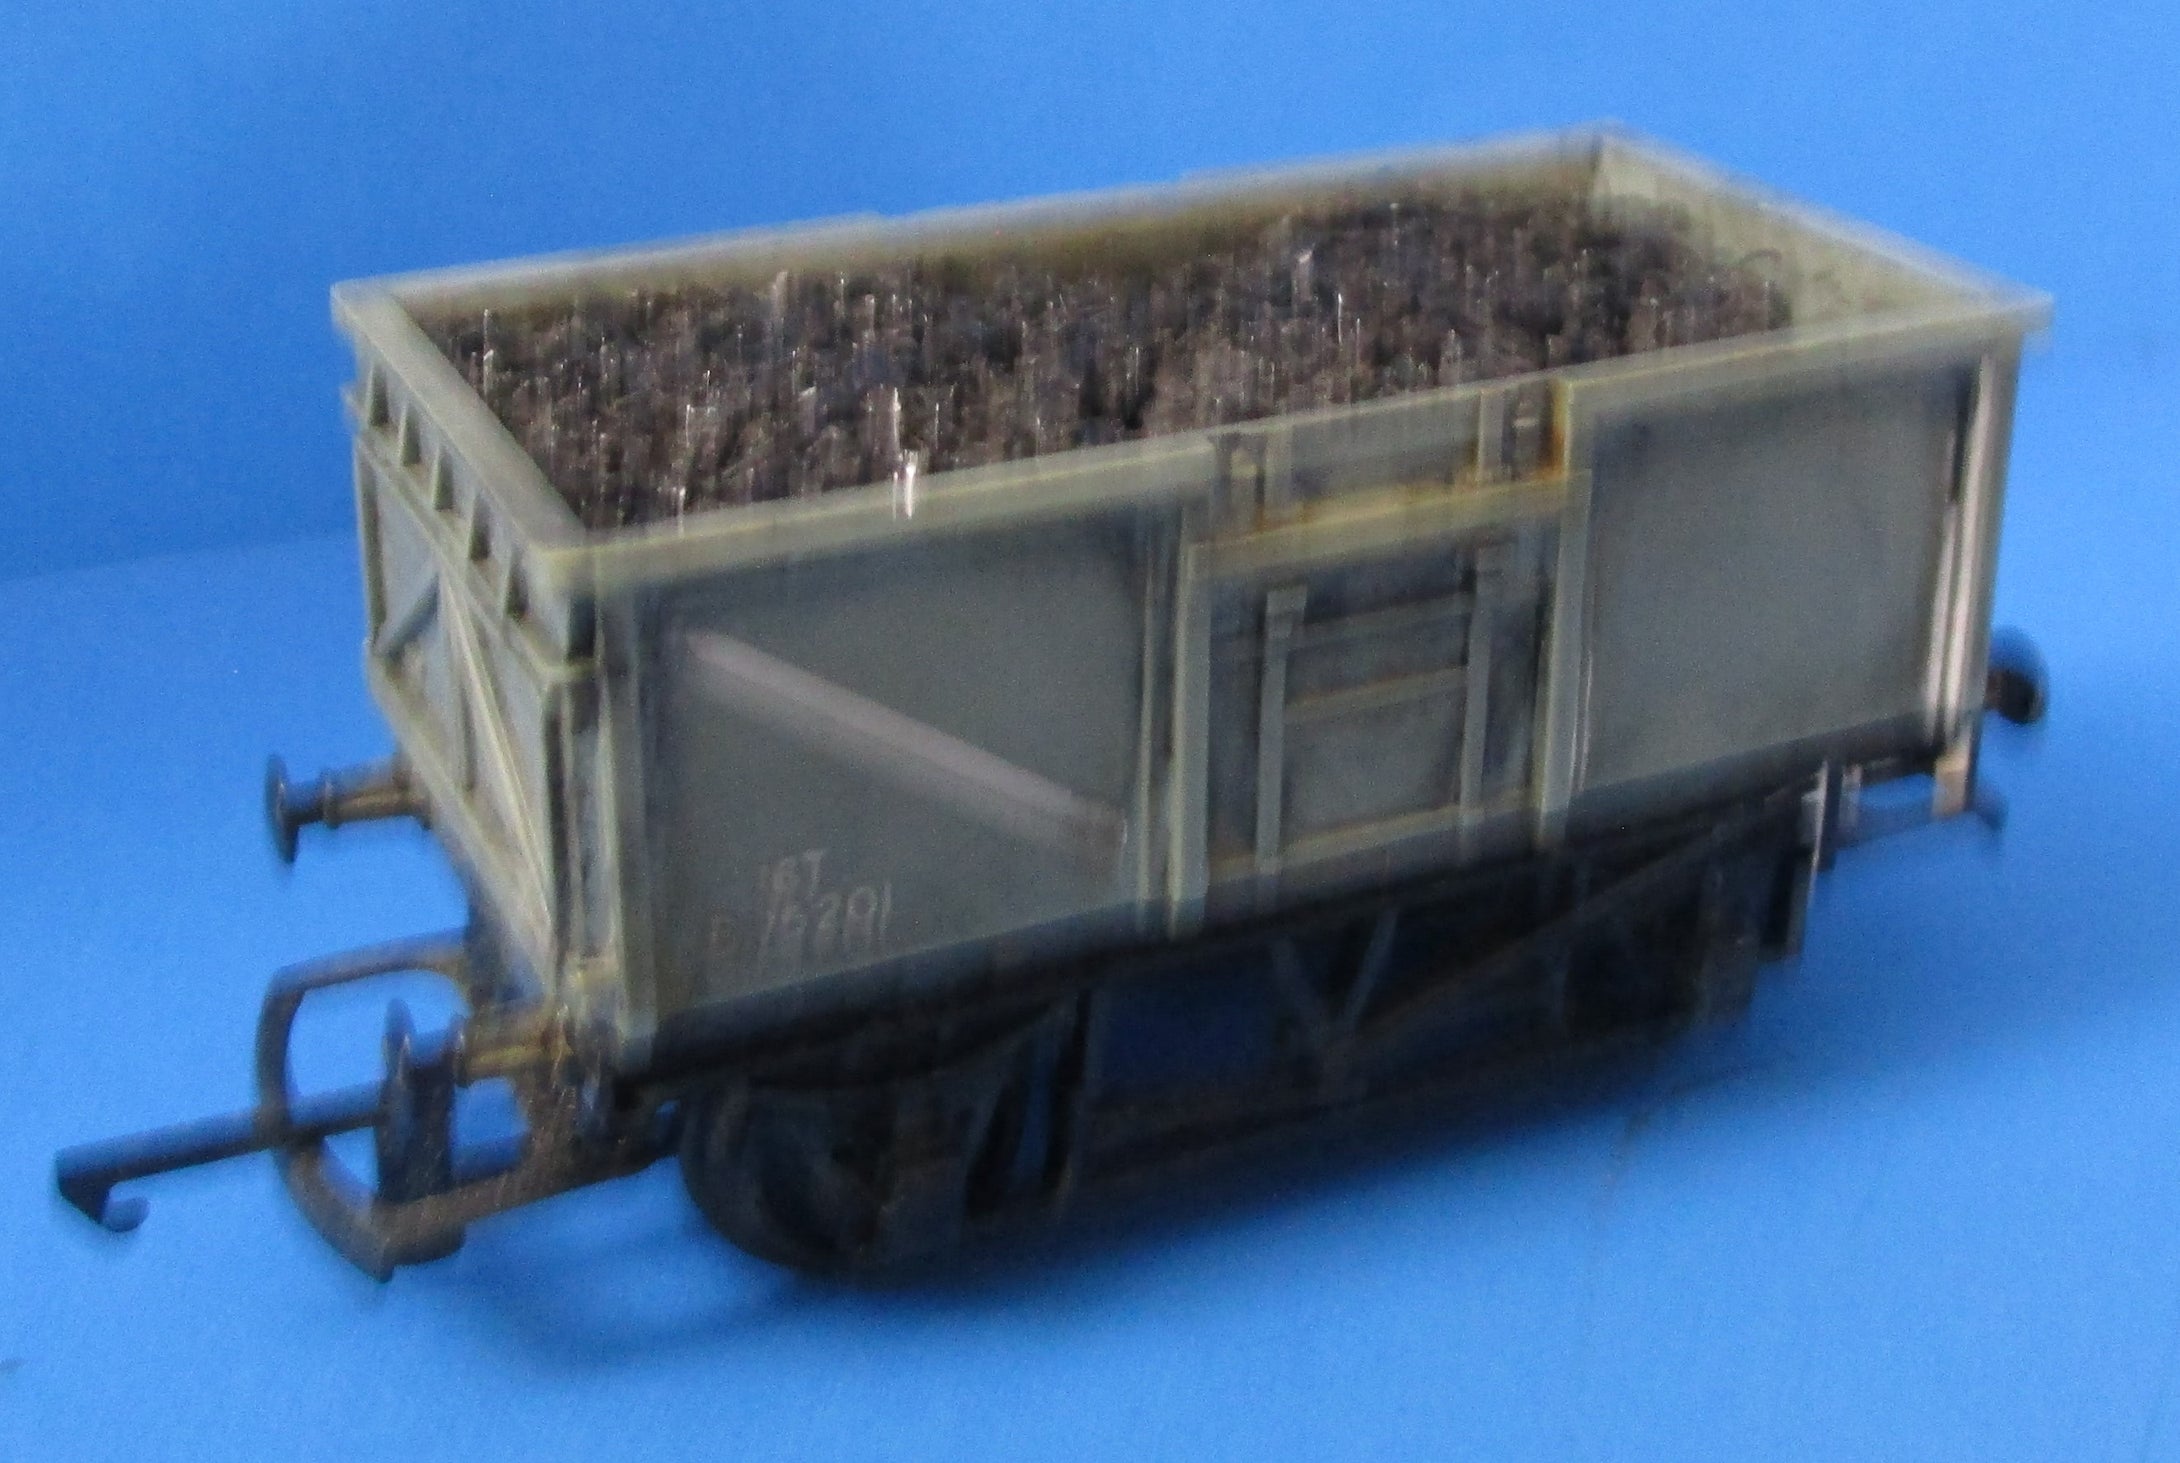 R217-P01 HORNBY B.R Mineral Wagon B75201 with coal load - dark grey - UNBOXED